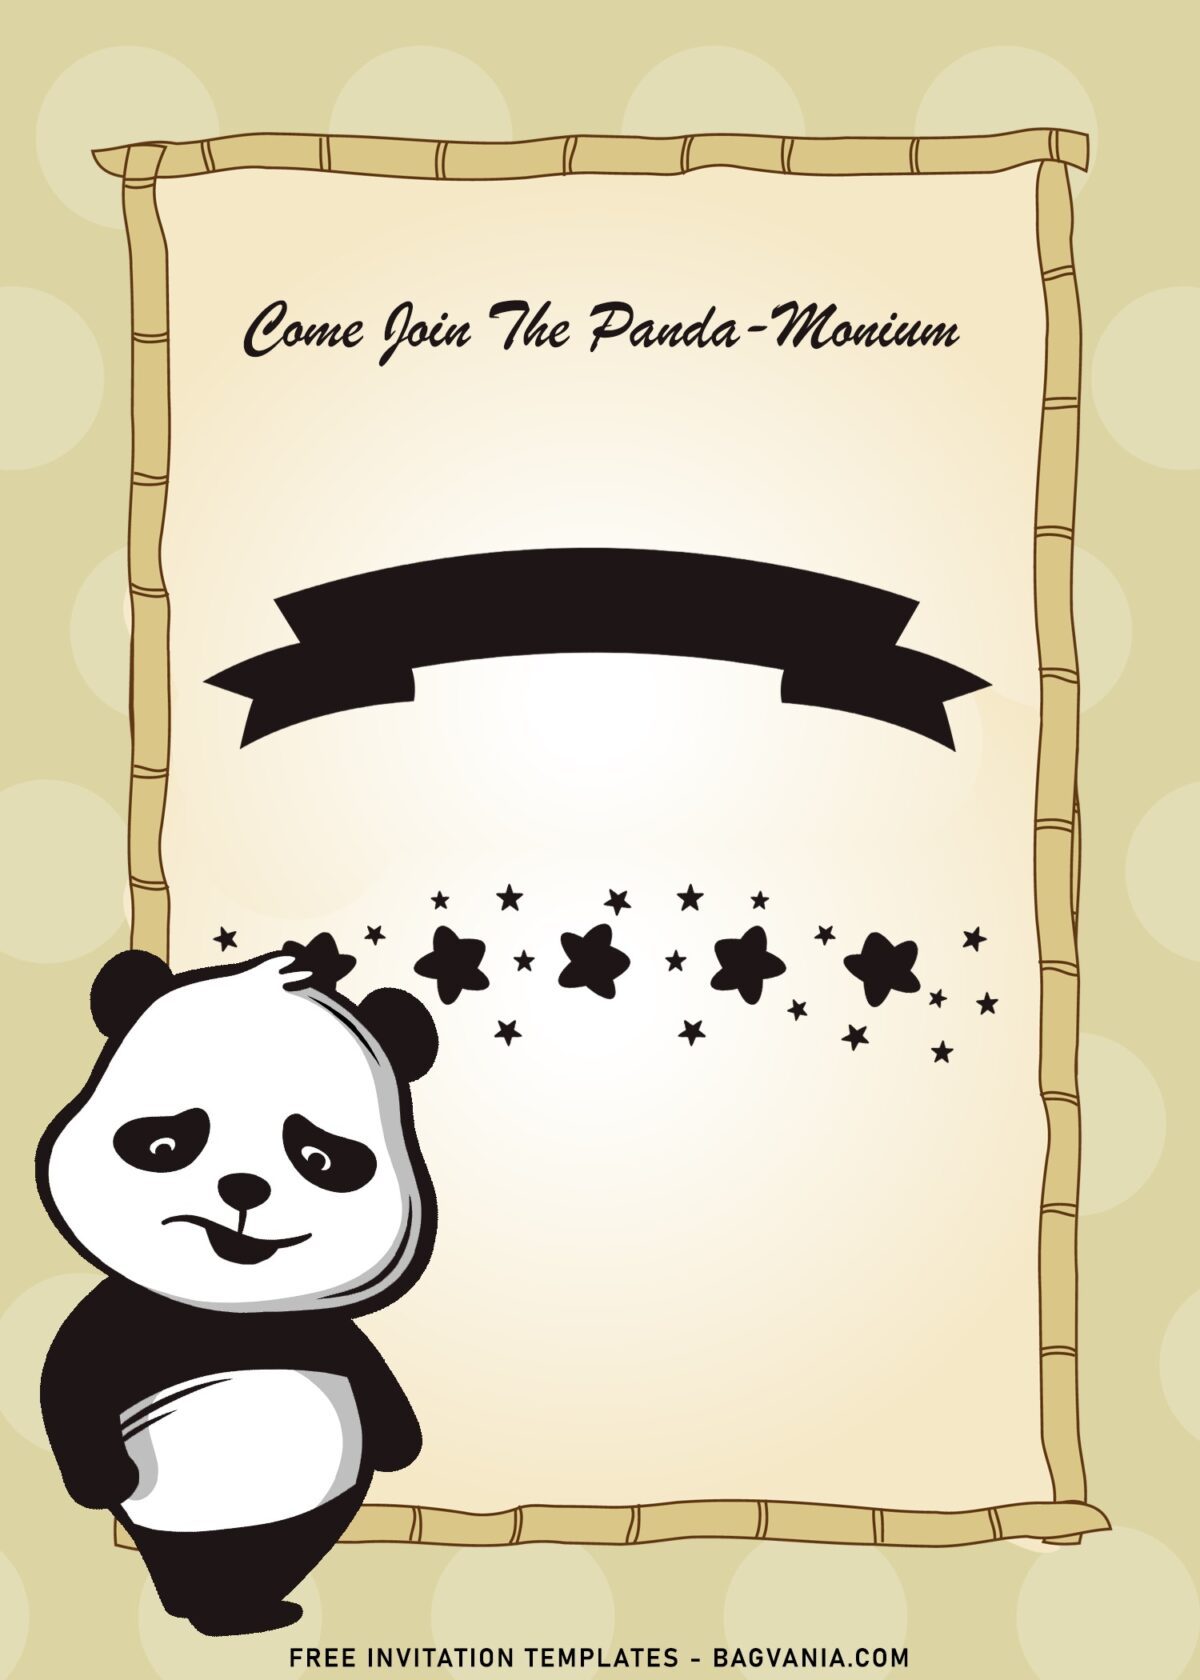 9+ Funny Panda Birthday Invitation Templates For Your Kid's Birthday with printable and editable format